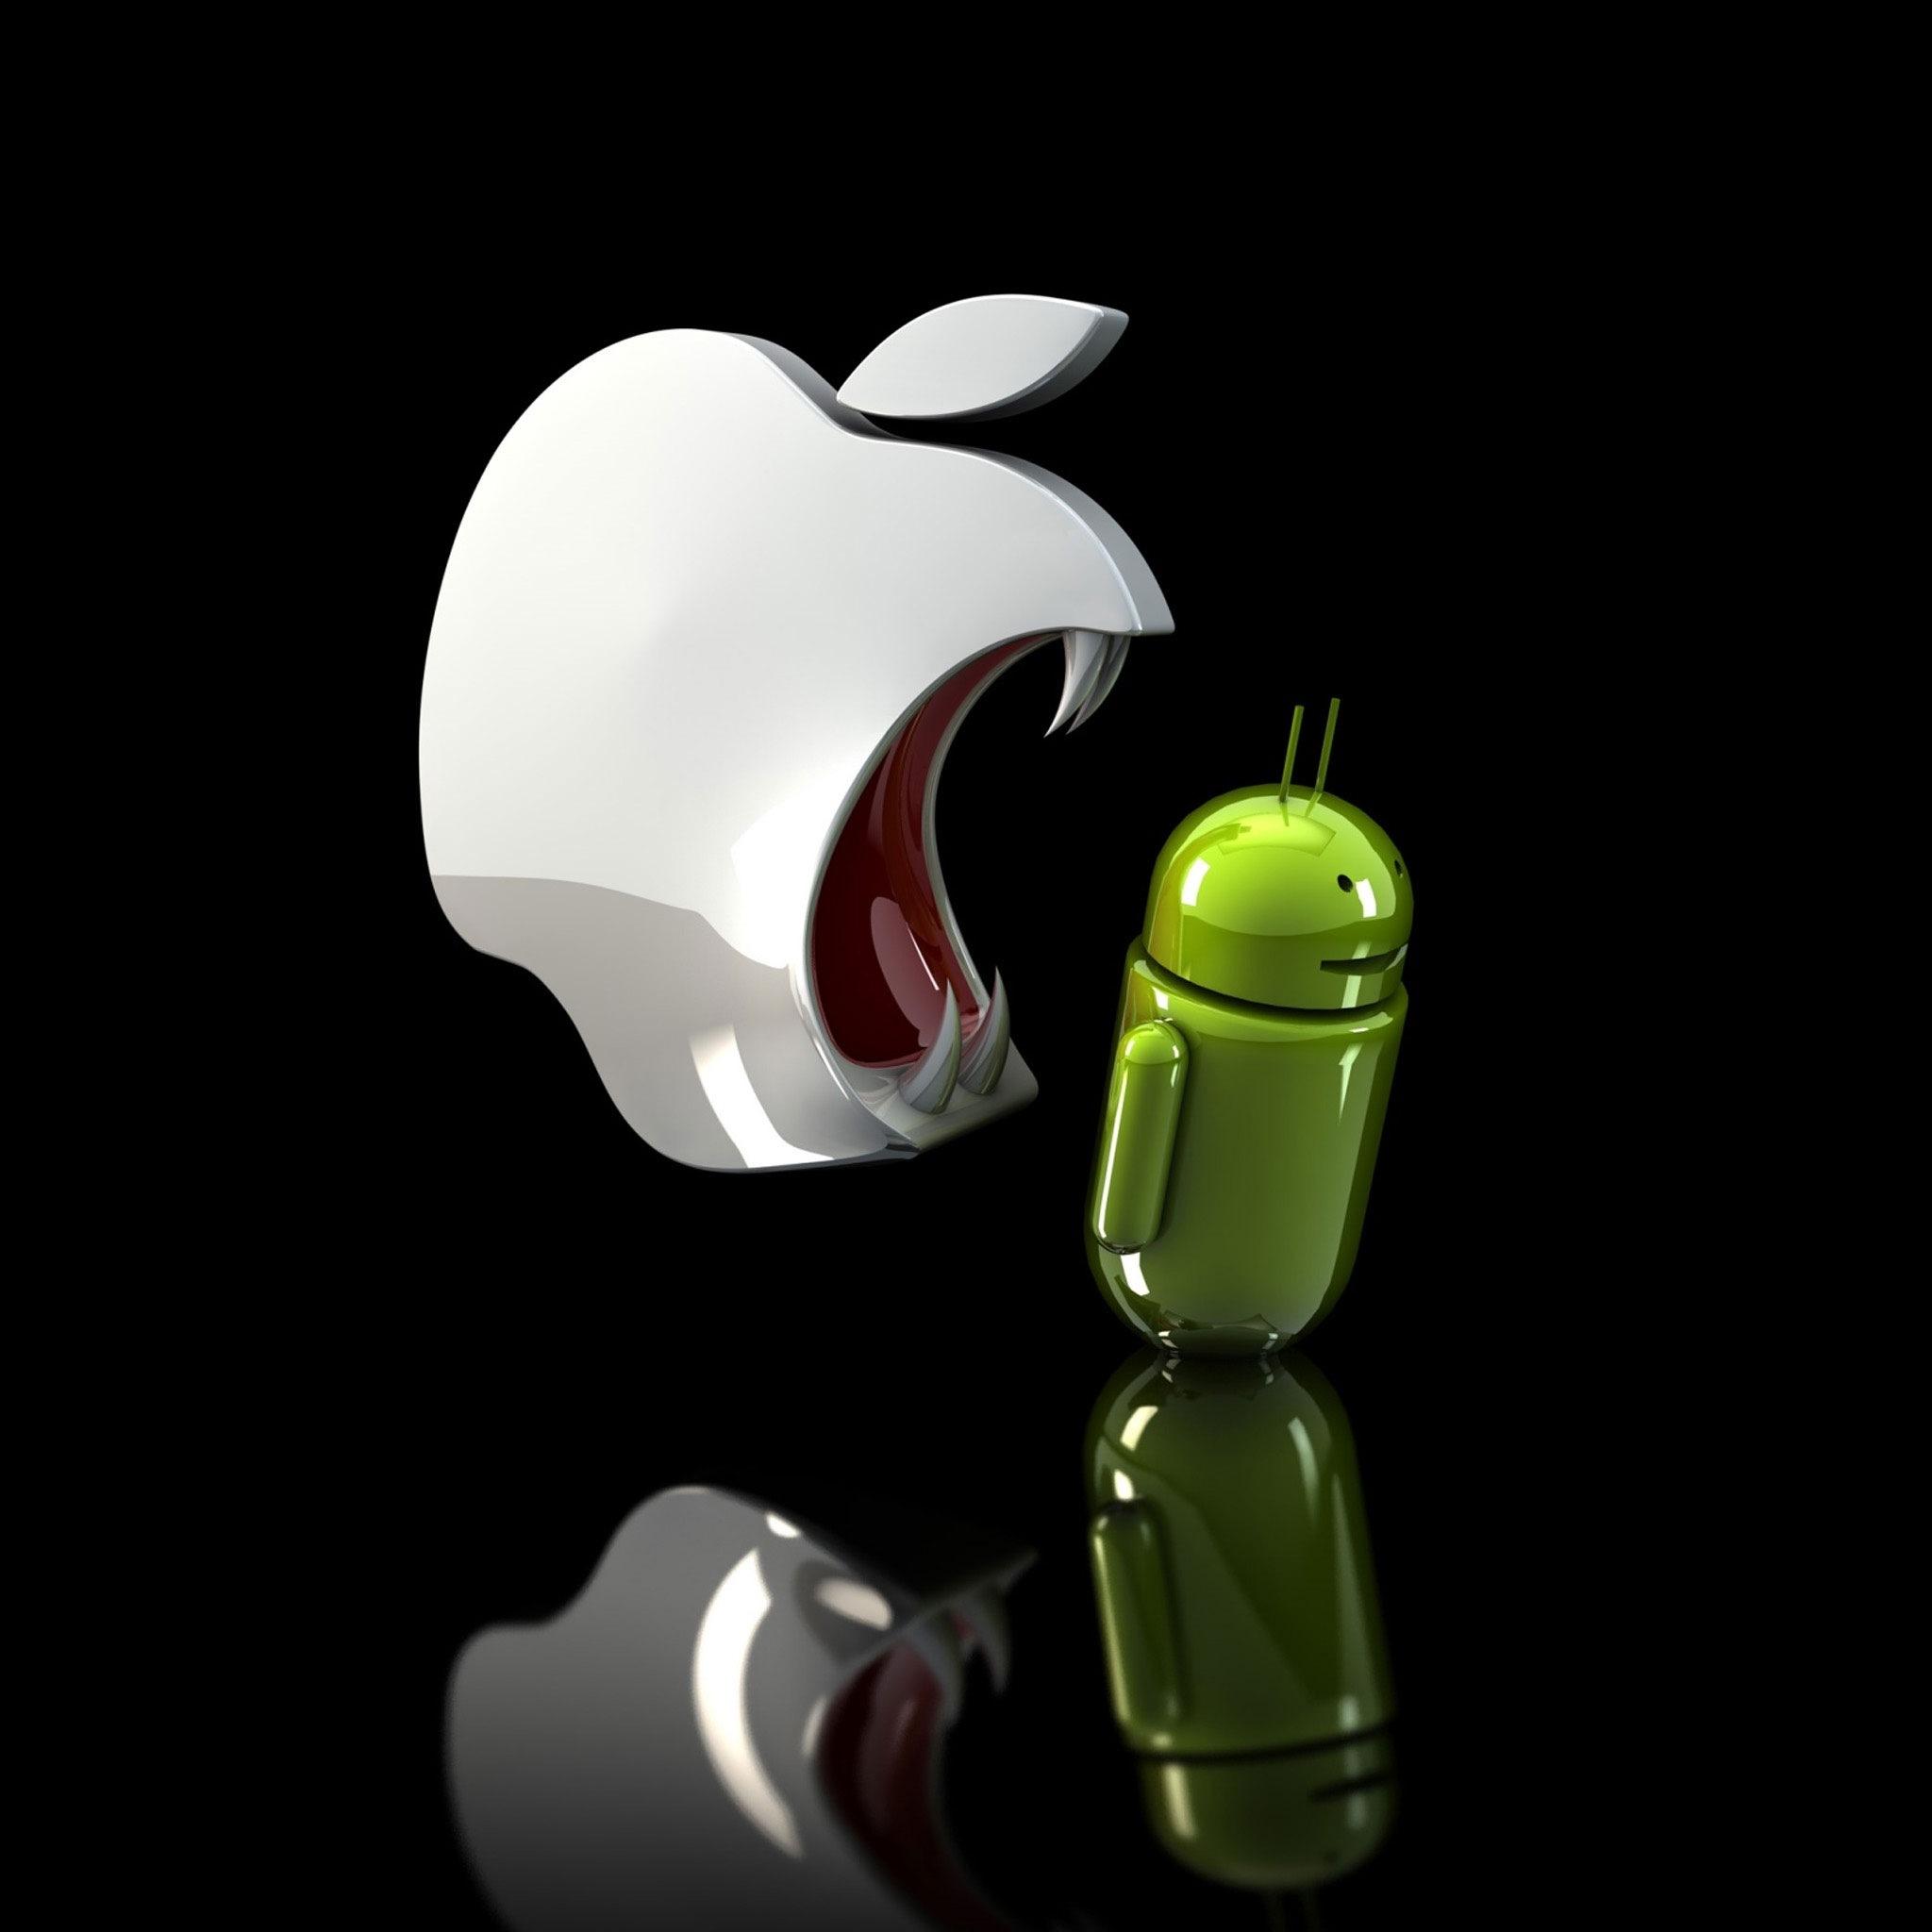 Funny Apple and Android Logo Wallpaper